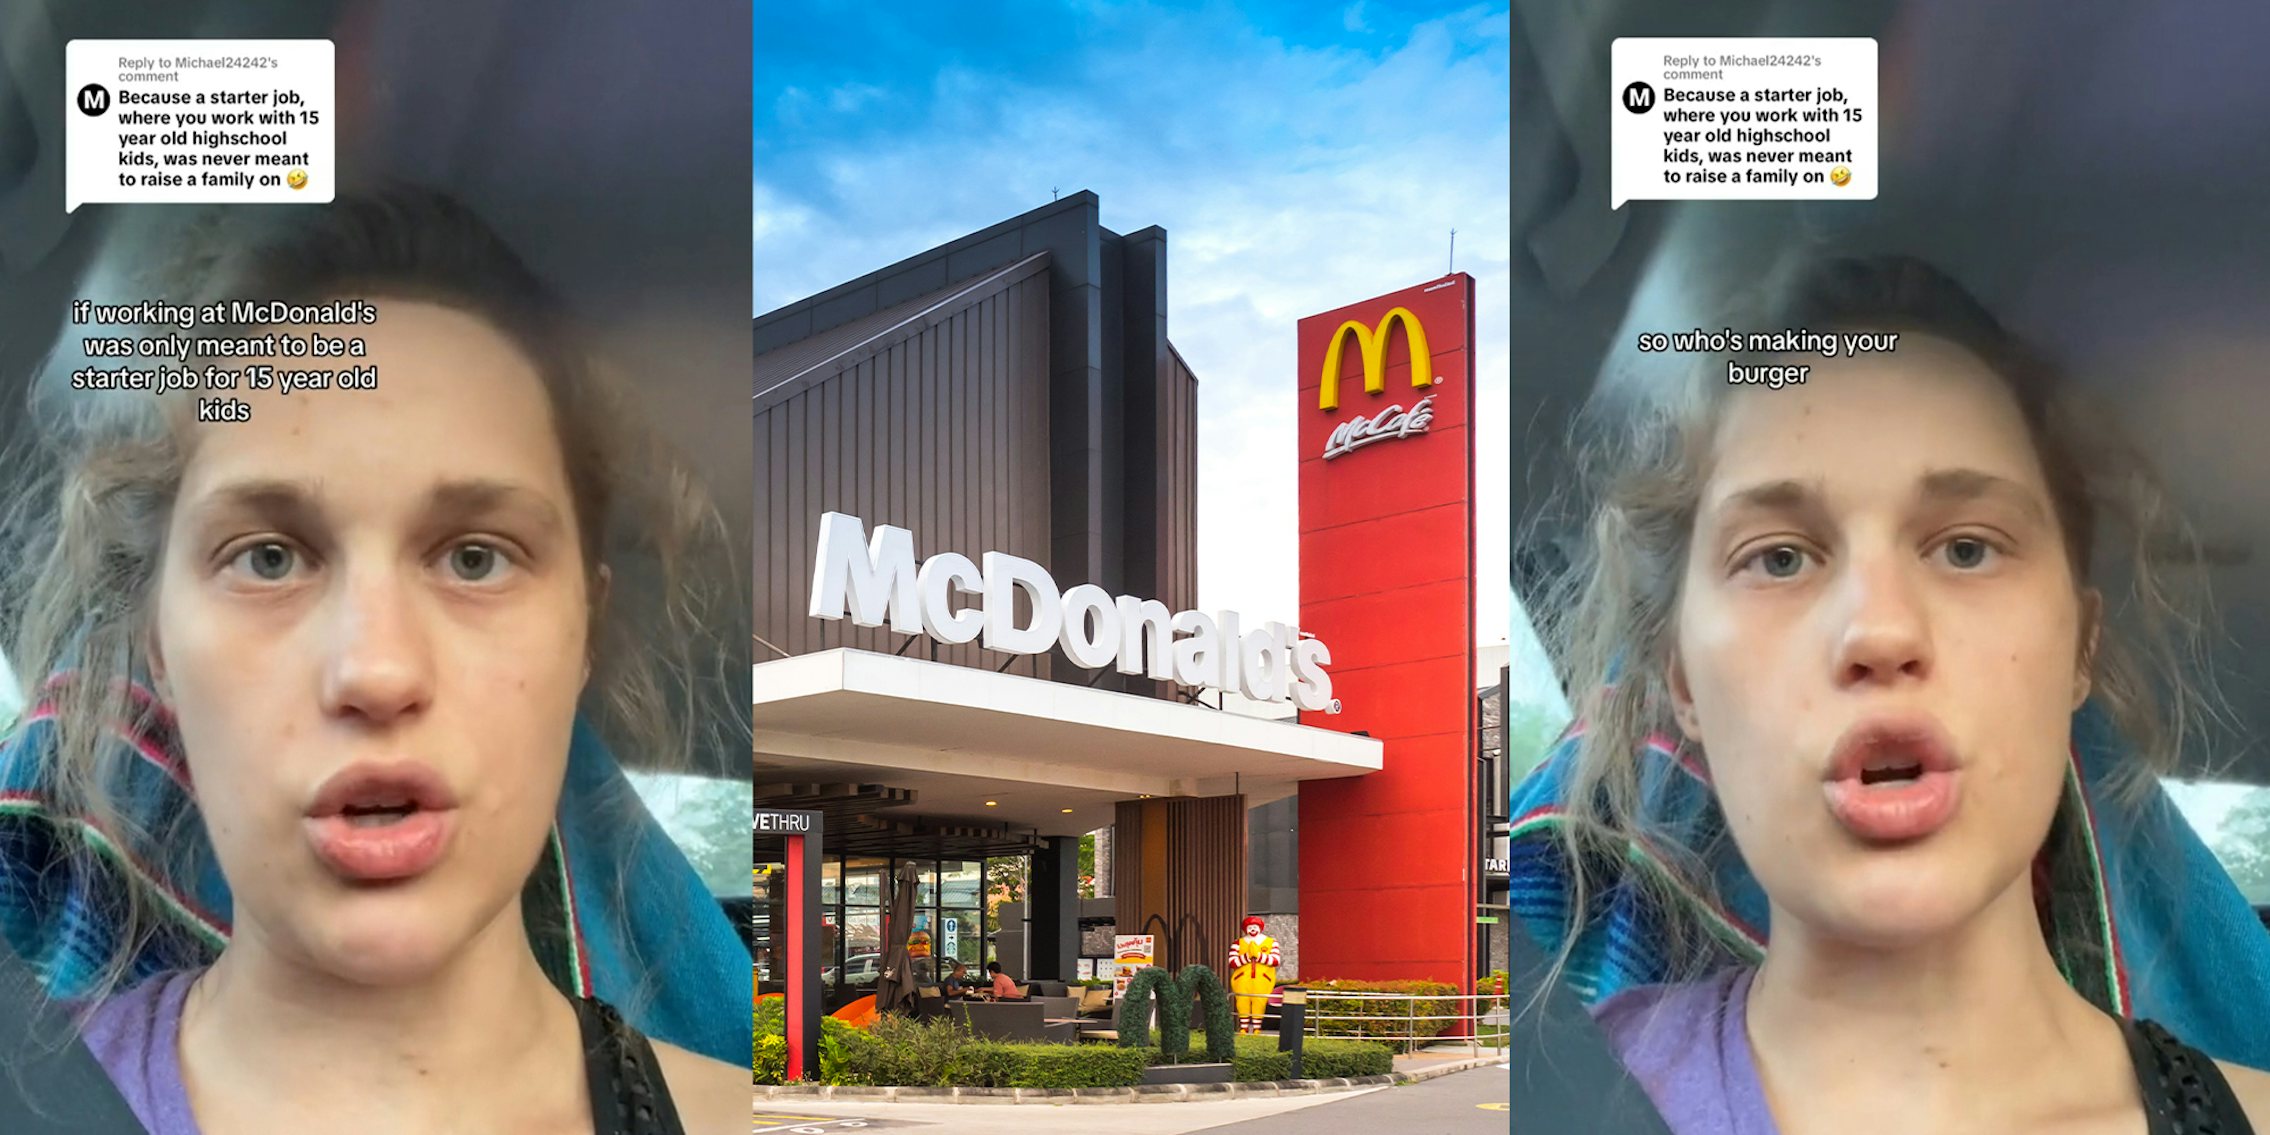 Worker slams viewer for saying McDonald's is only a 'starter job' for 15-year-olds